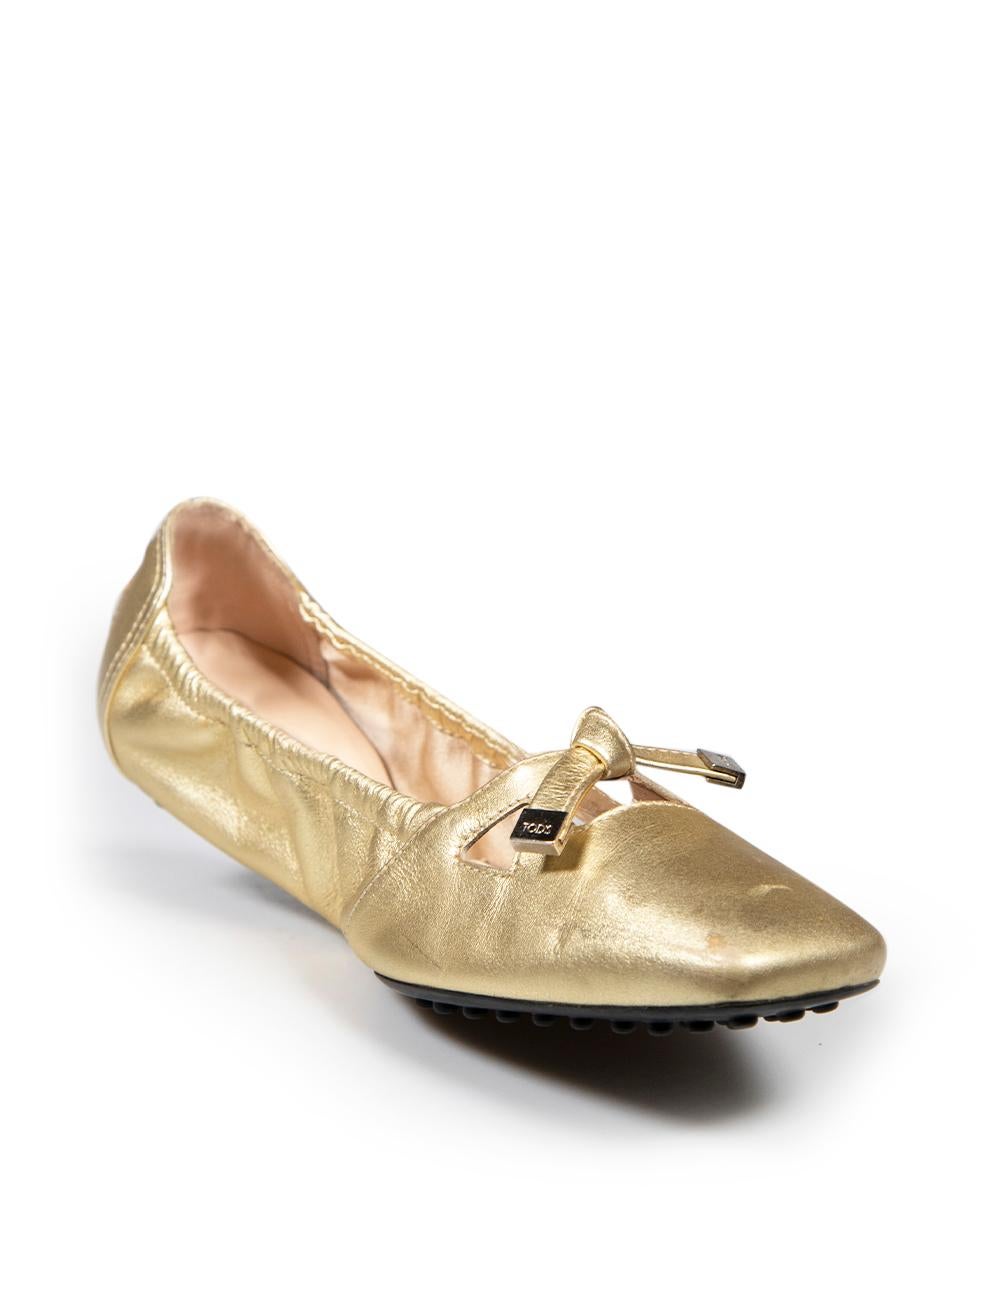 CONDITION is Good. General wear to shoes is evident. Moderate signs of wear to both shoe toes with discoloured marks to the leather on this used Tod's designer resale item.
 
 Details
 Gold
 Leather
 Flat shoes
 Slip on
 Square toe
 Elasticated
 Bow